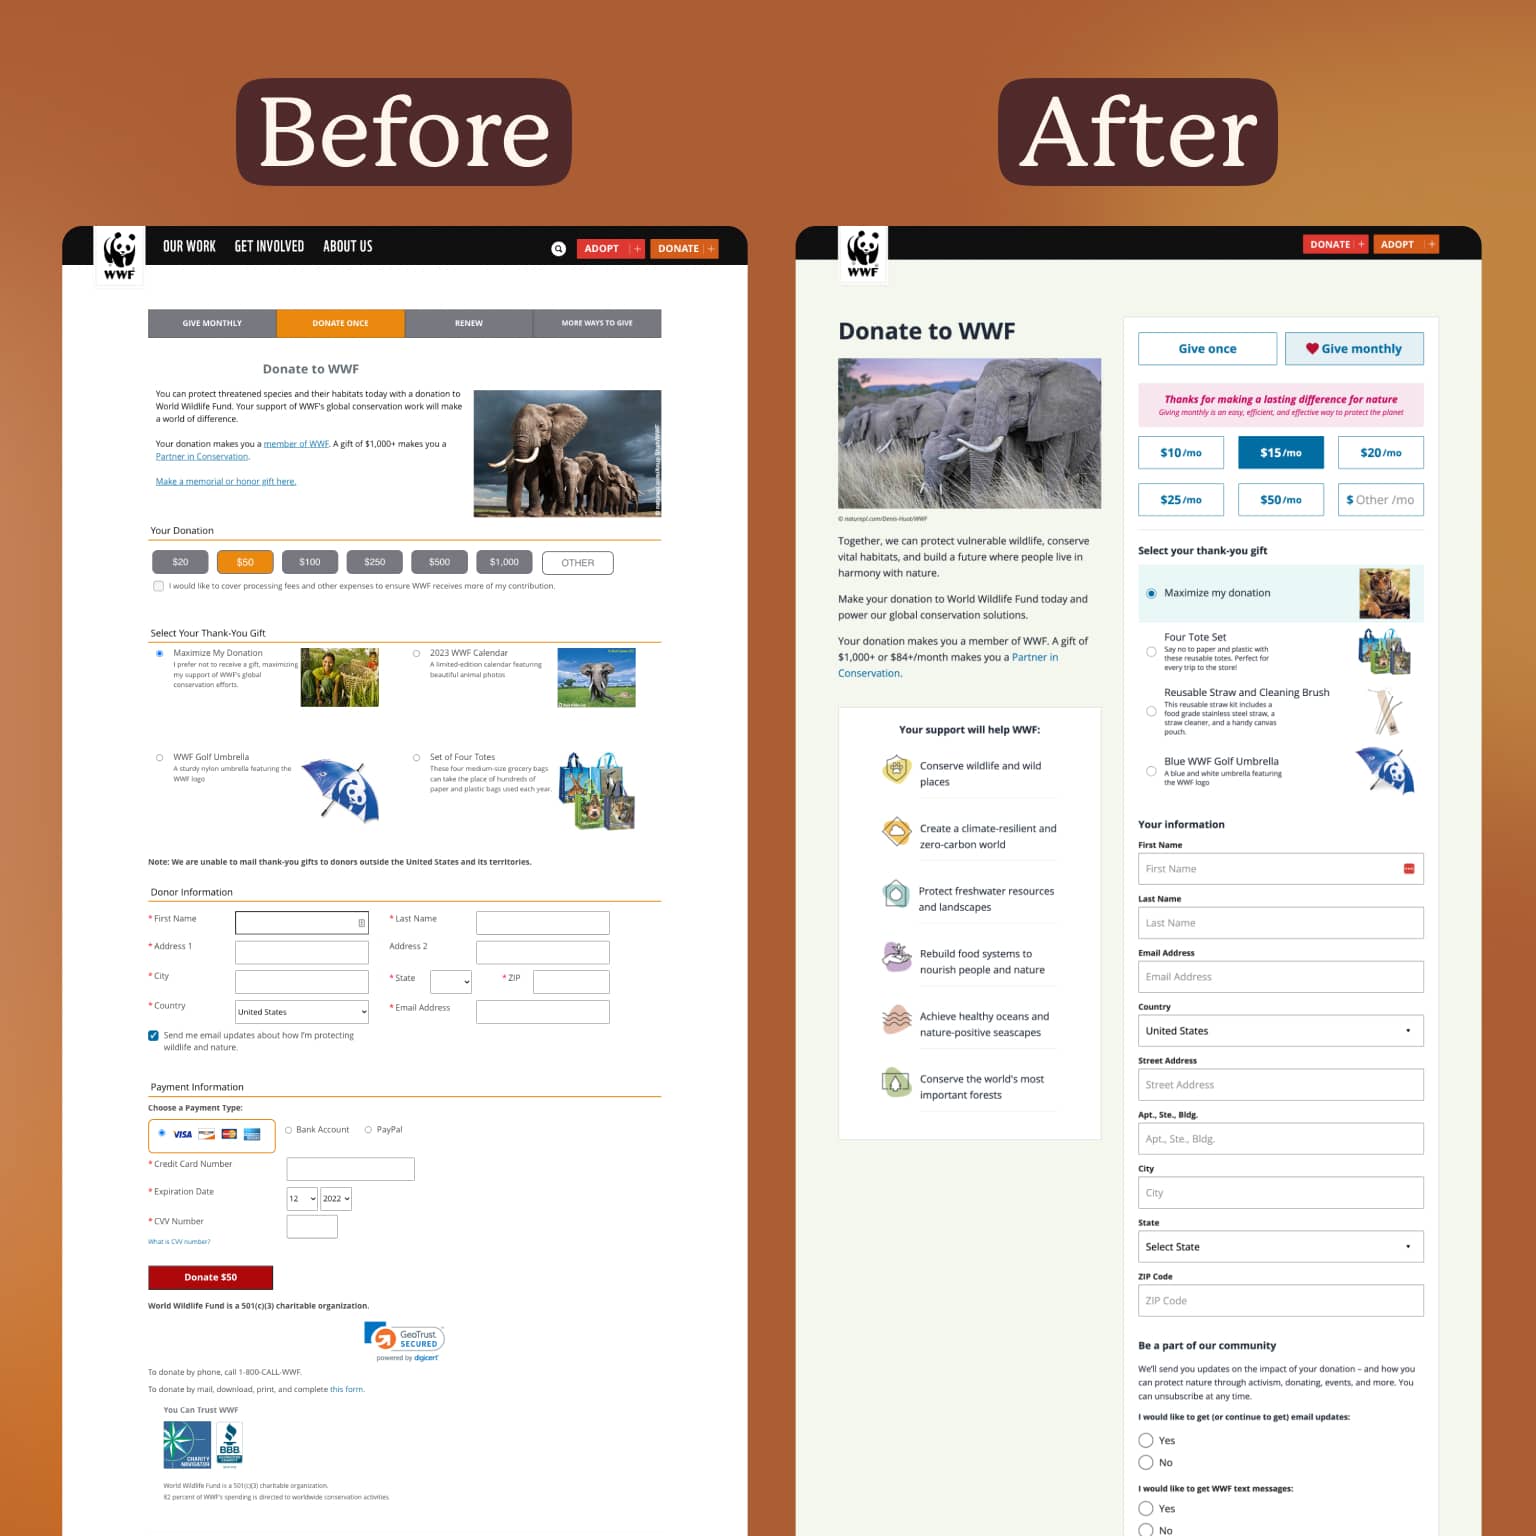 Before and after comparison of WWF's donation page design: Streamlining the entire experience with visual grouping and logical ordering.